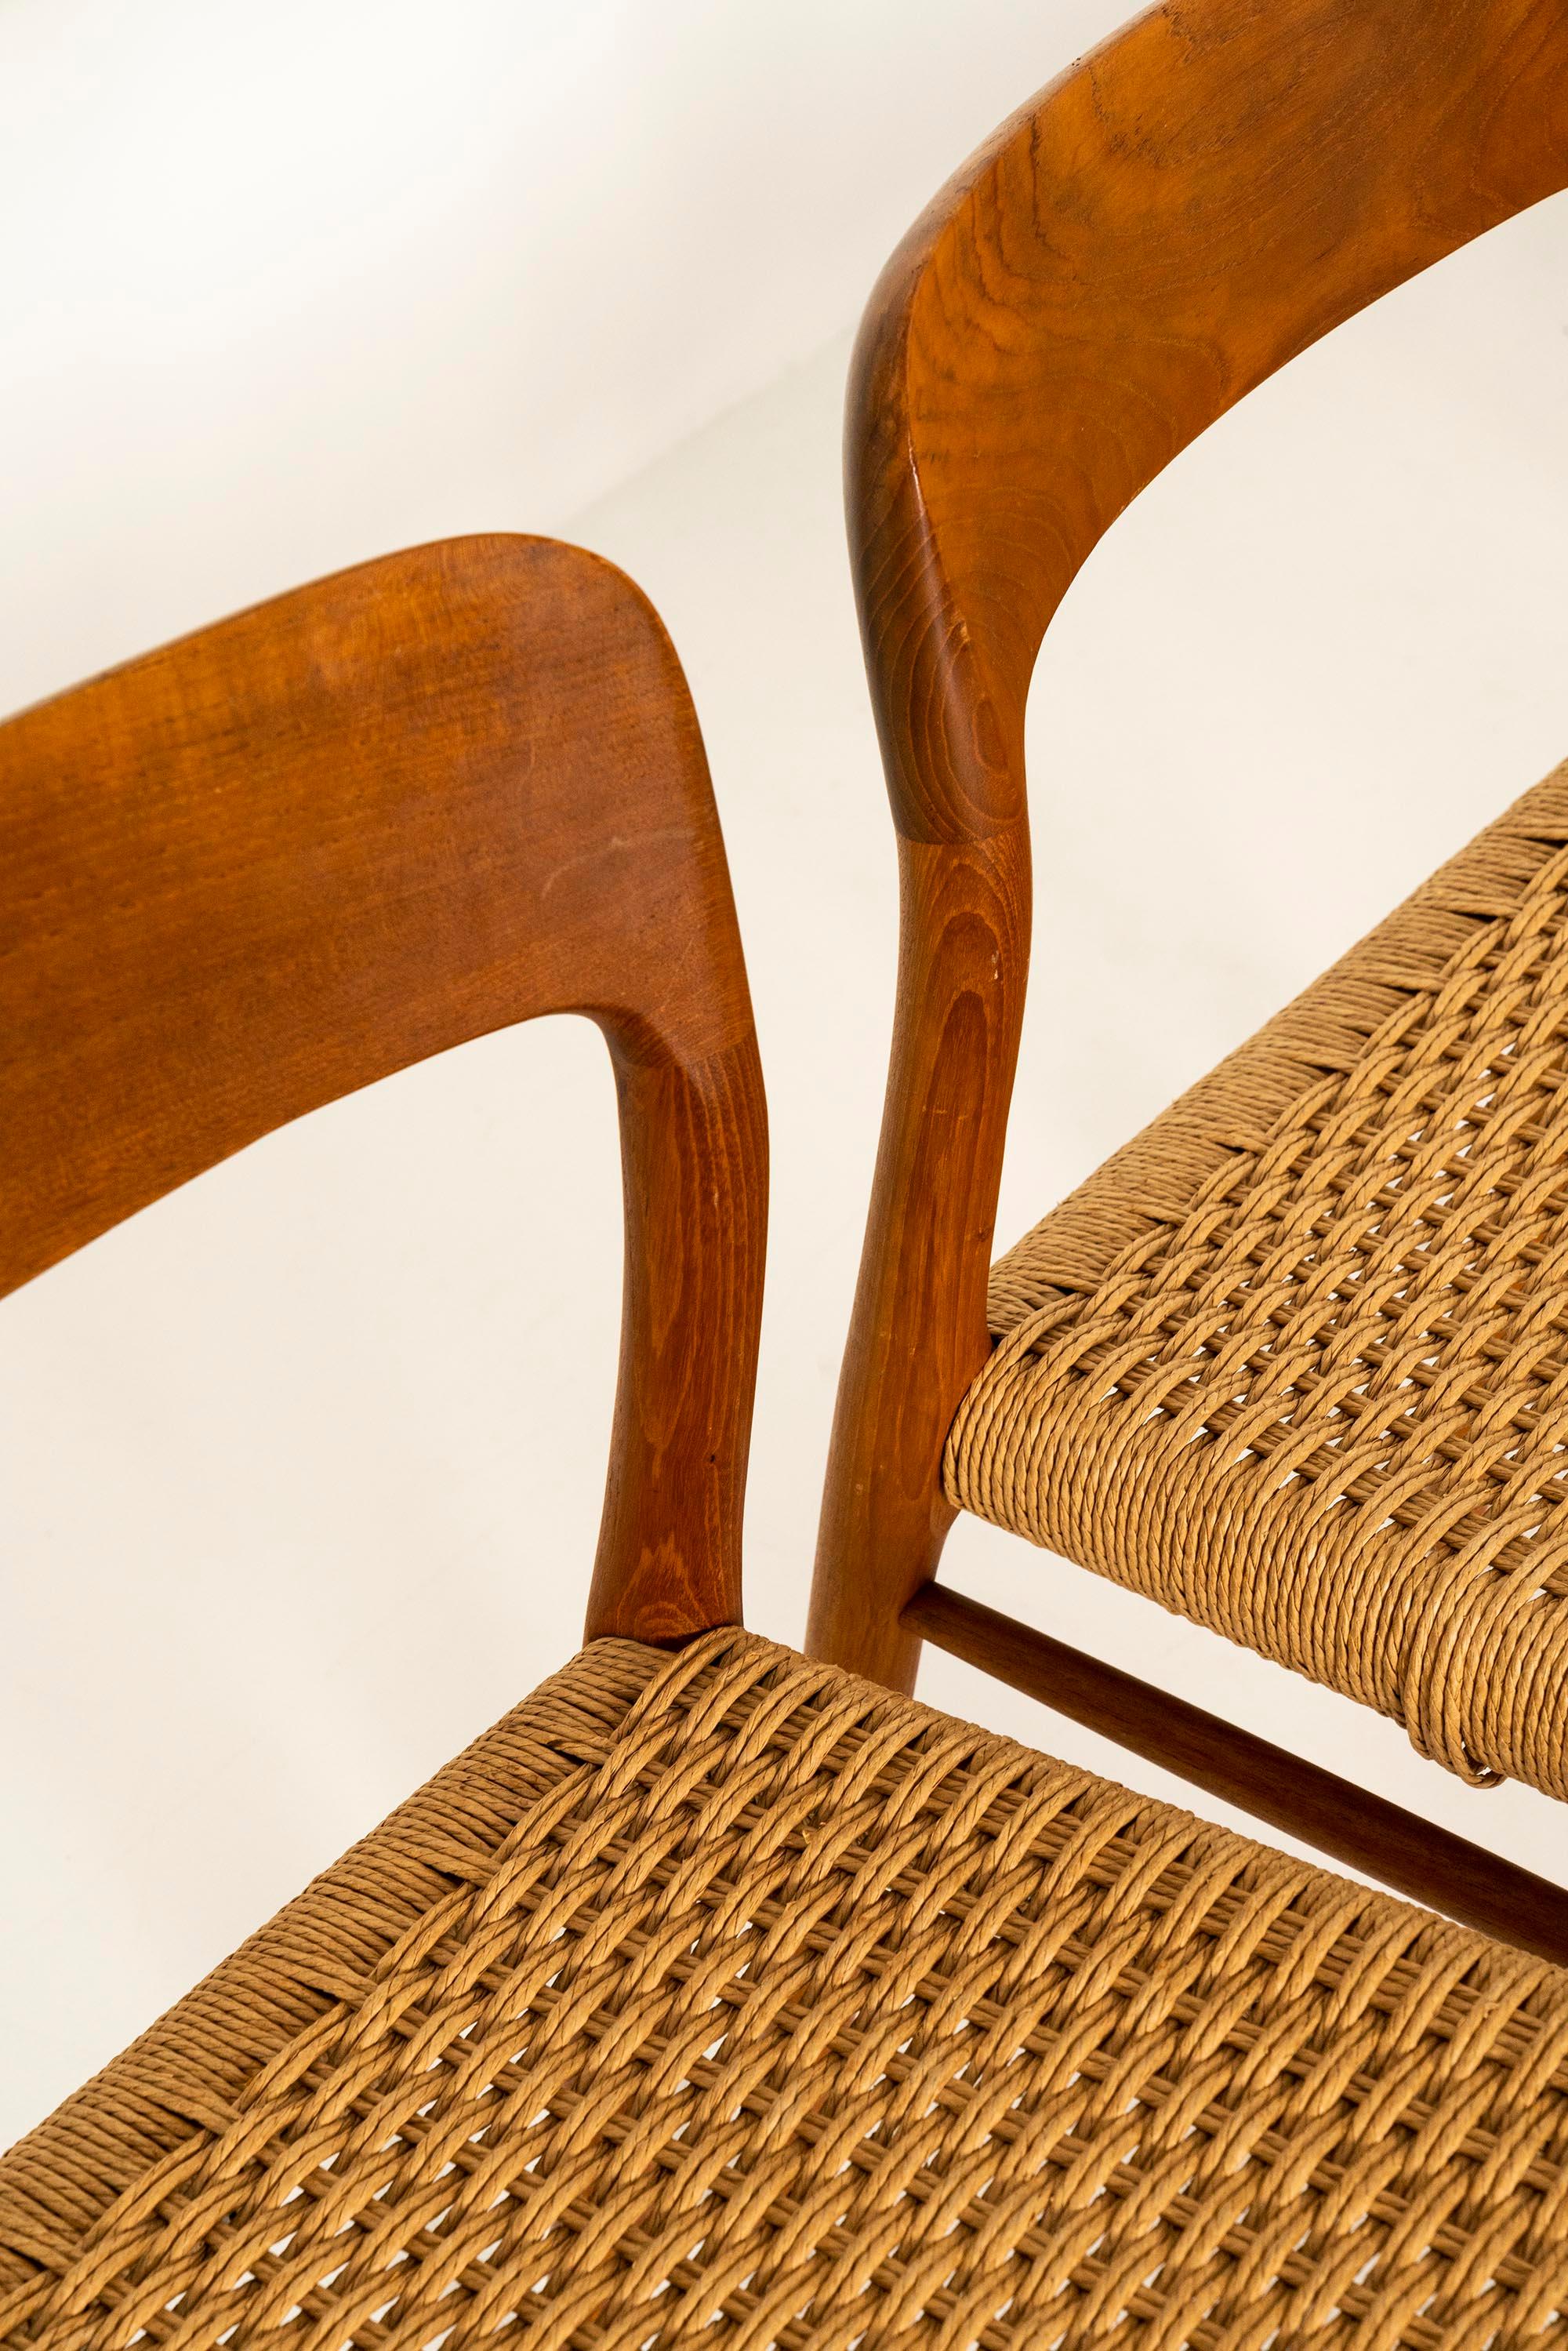 10 Niels Otto Møller 'Model 75' Chairs in Teak and Danish Paper Cord, 1960s For Sale 5